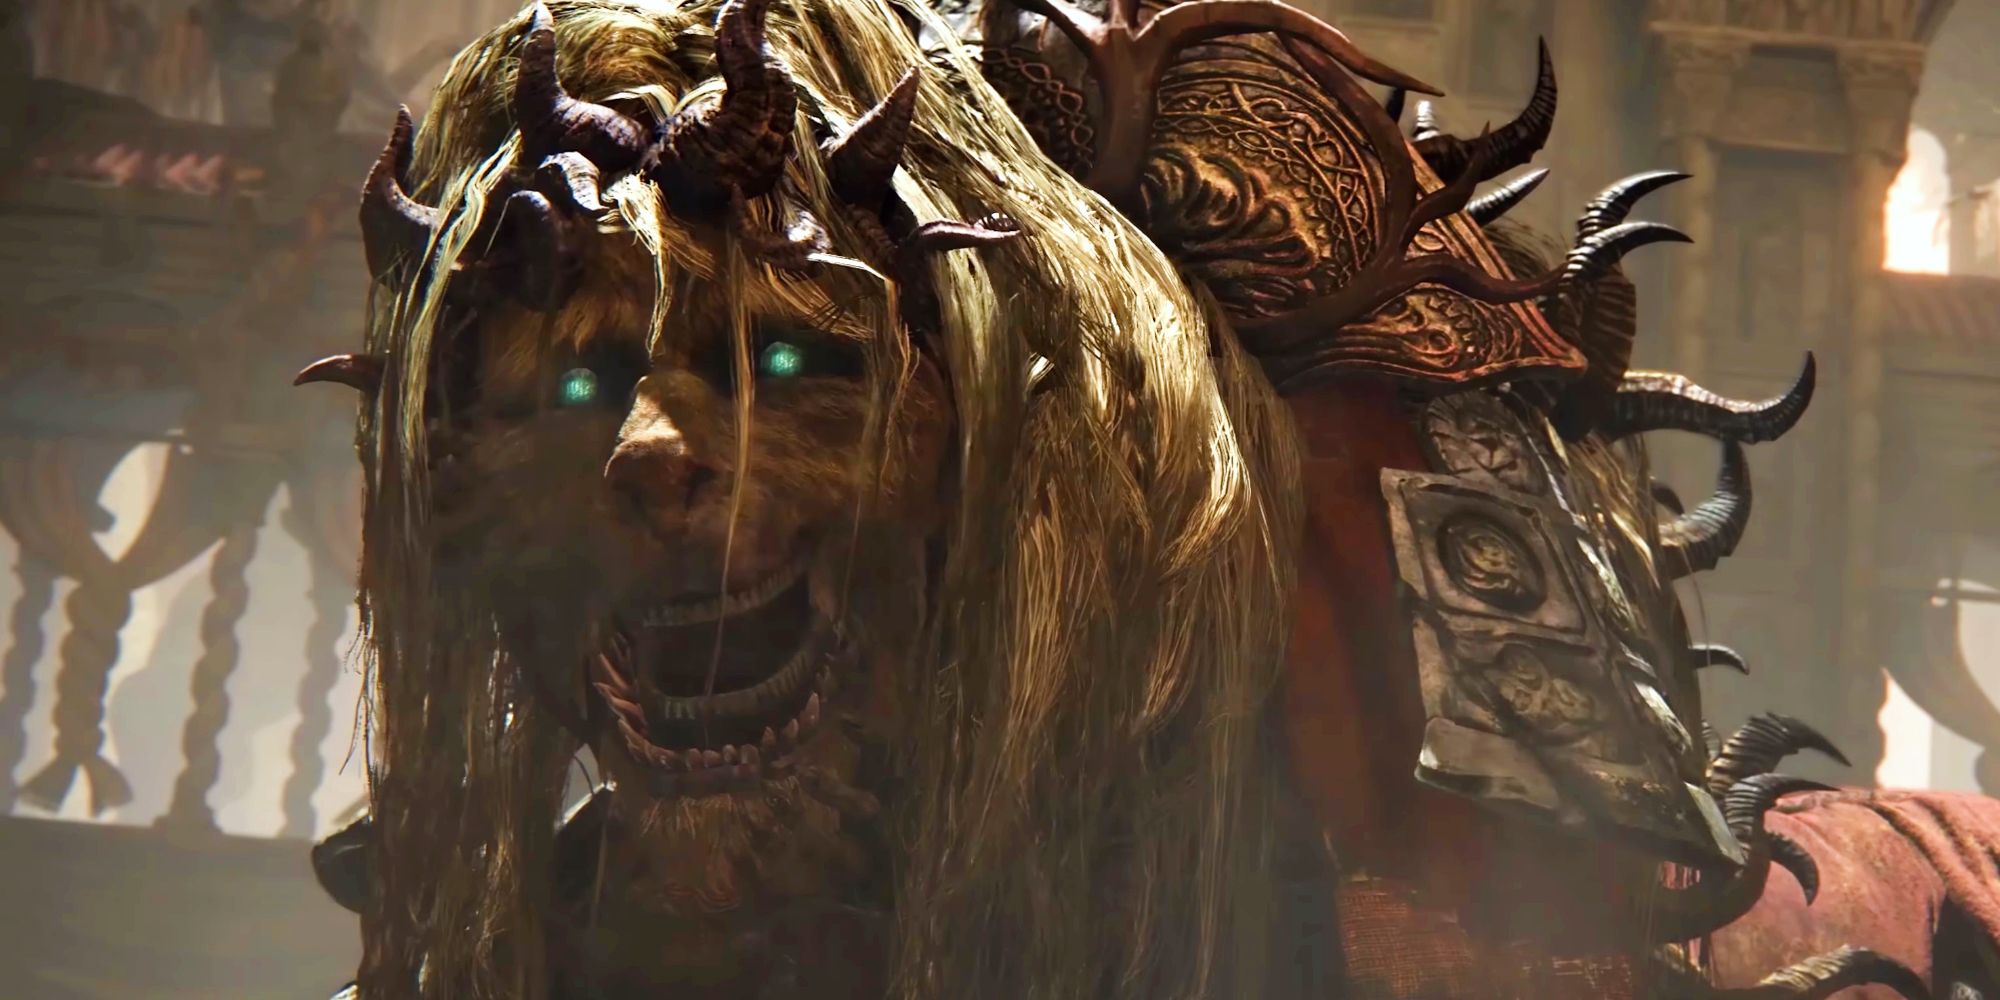 A monster from Elden Ring's Shadow of the Erdtree DLC, reminiscent of a lion, but with glowing green eyes, human-like teeth, and horns sprouting from its body in many places.